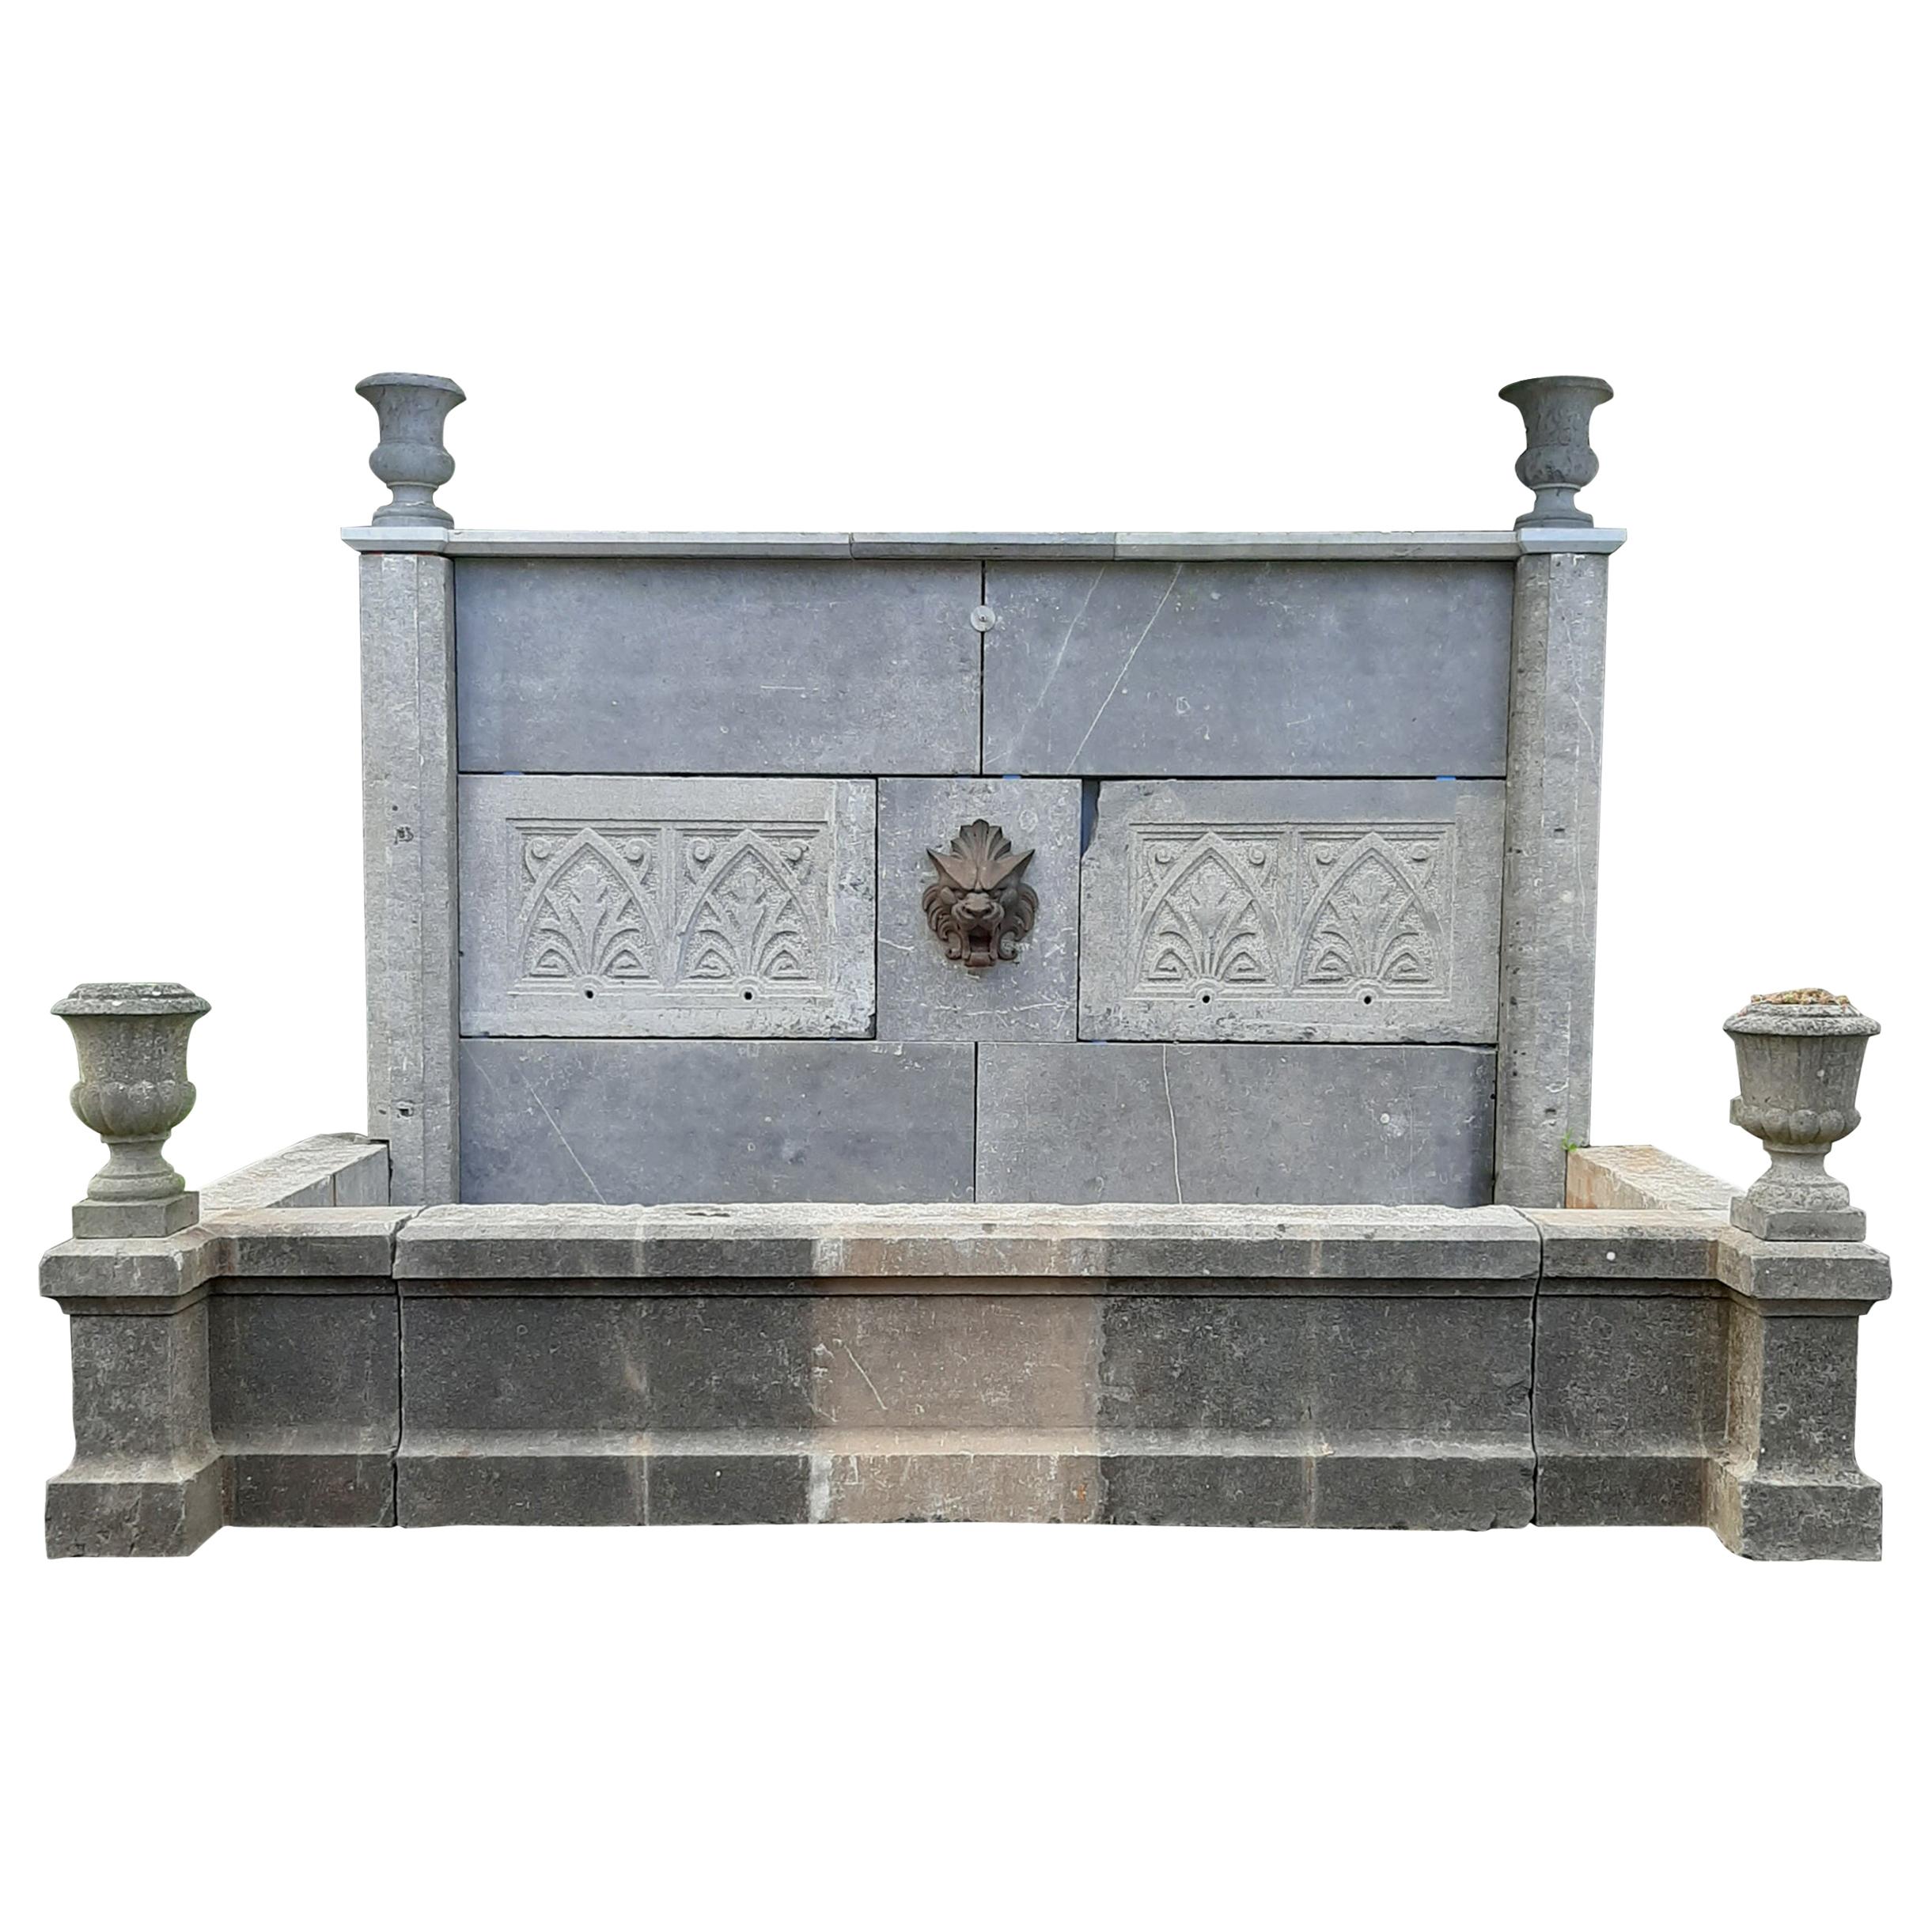 Very large Belgian Bluestone Wall Fountain with Pool Surround